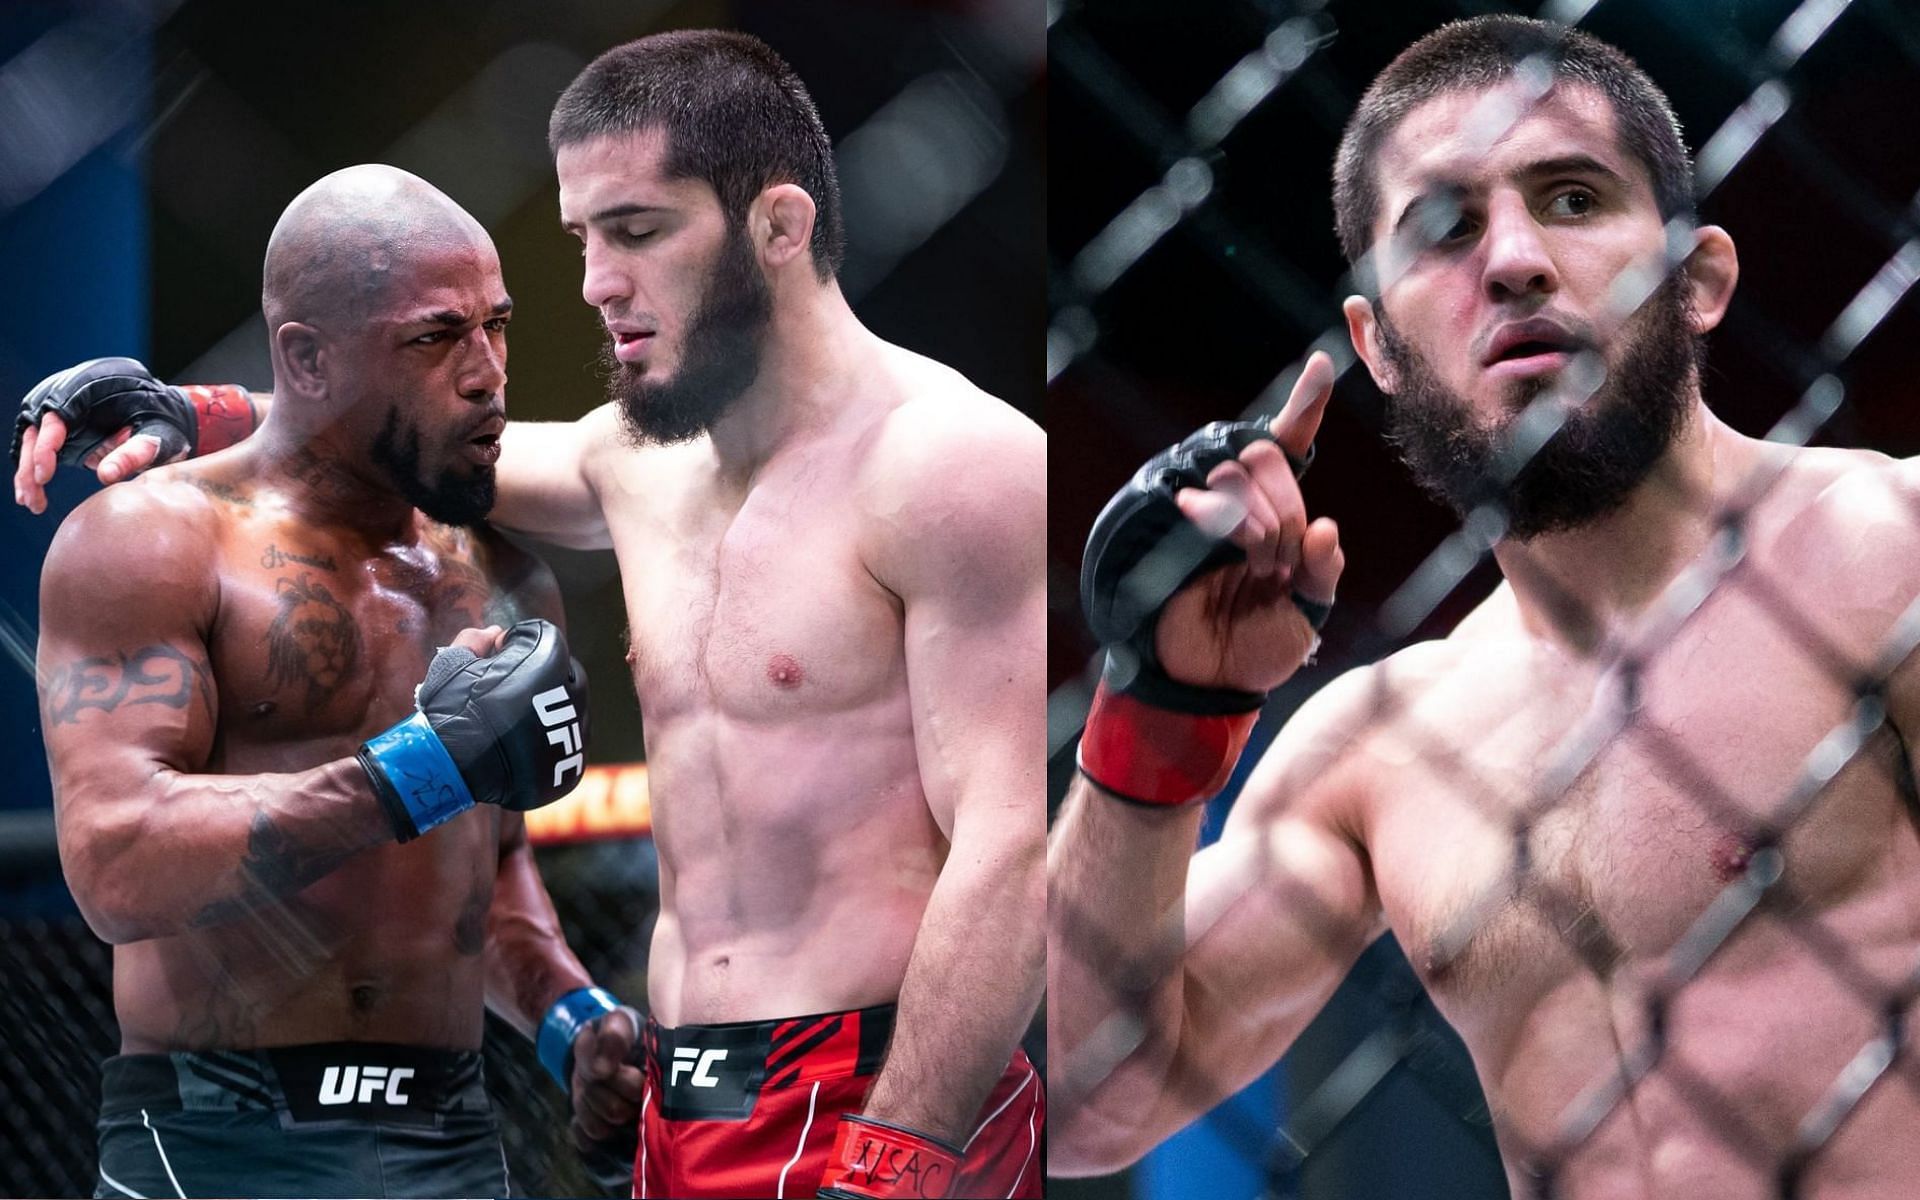 Bobby Green and Islam Makhachev (Left, Image credit: UFC.com) and Islam Makhachev (Right, Image credit: Islam Makhachev Twitter @makhachevmma)